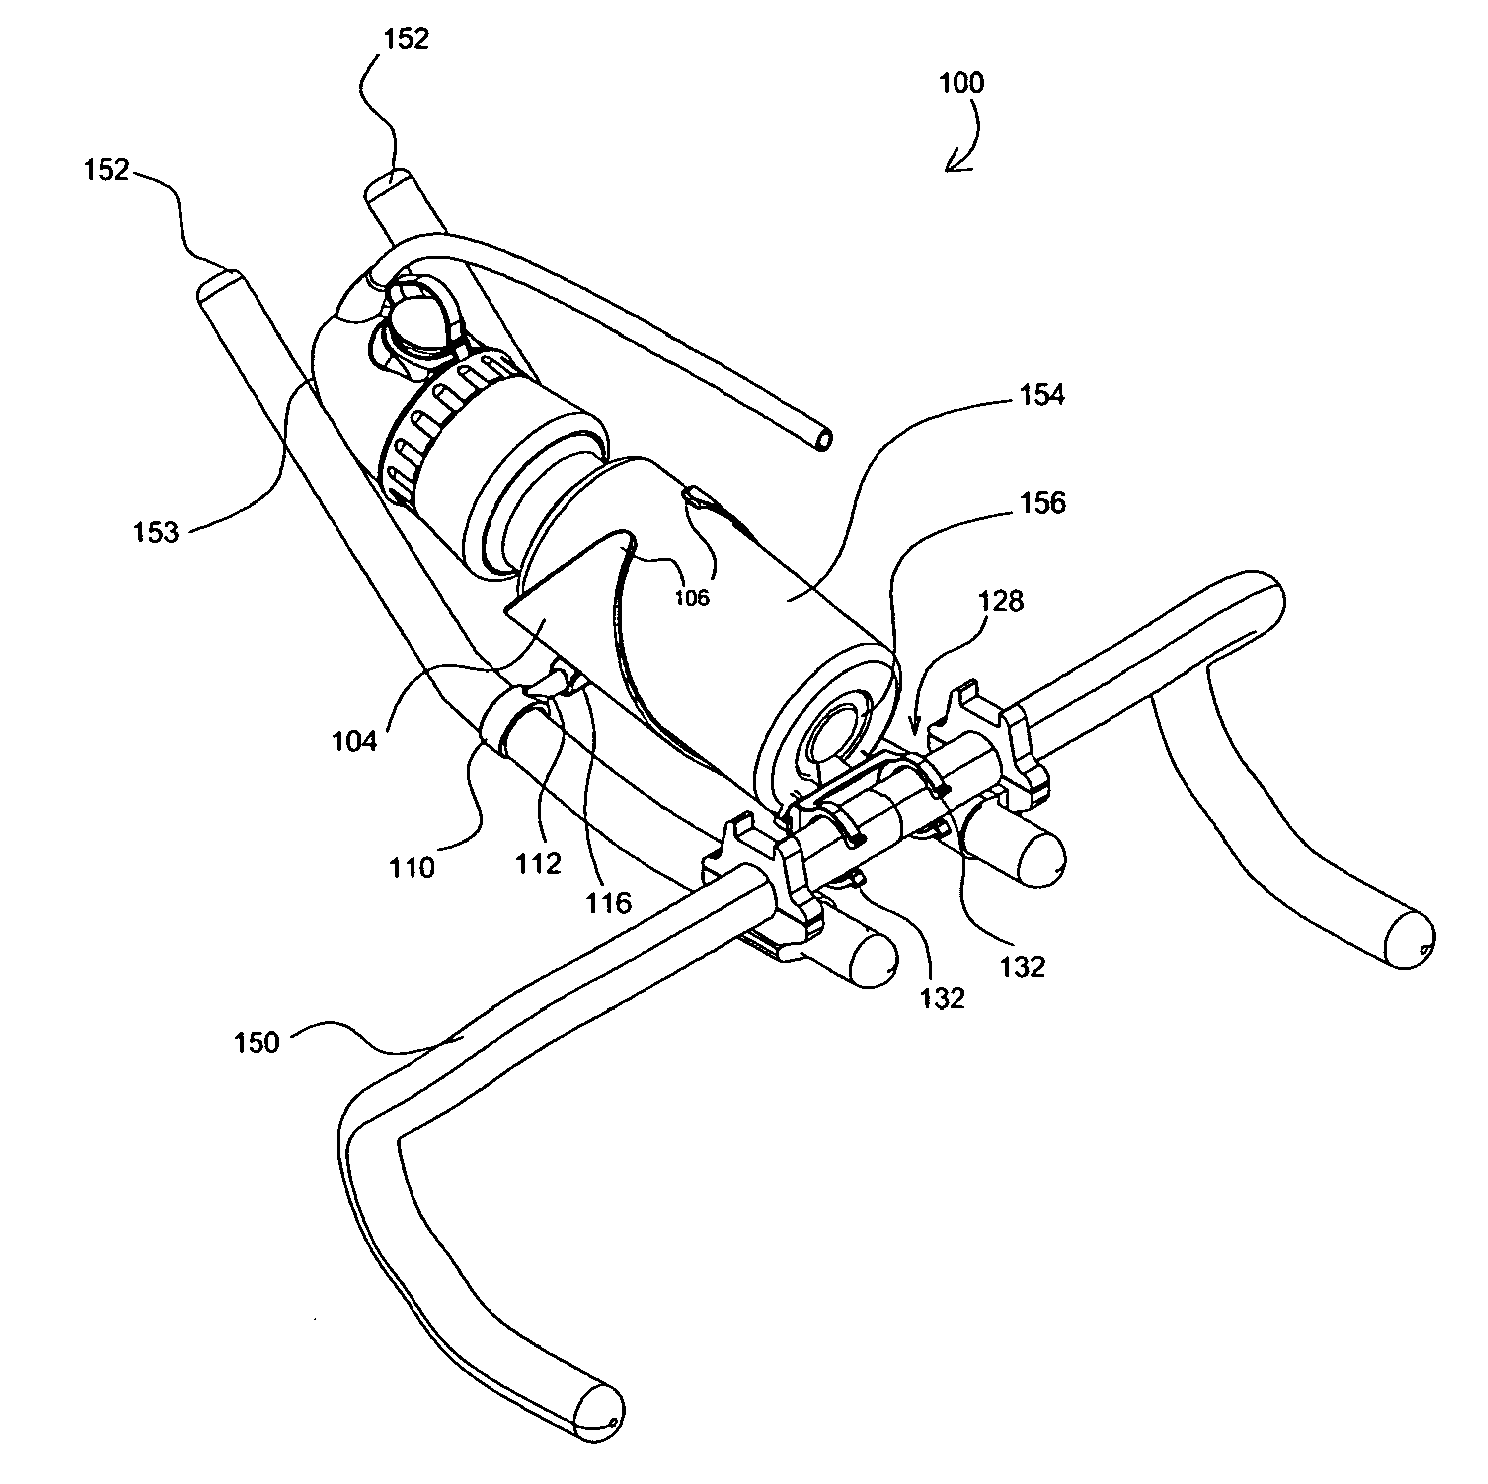 Aerodynamic bottle support cage for bicycles